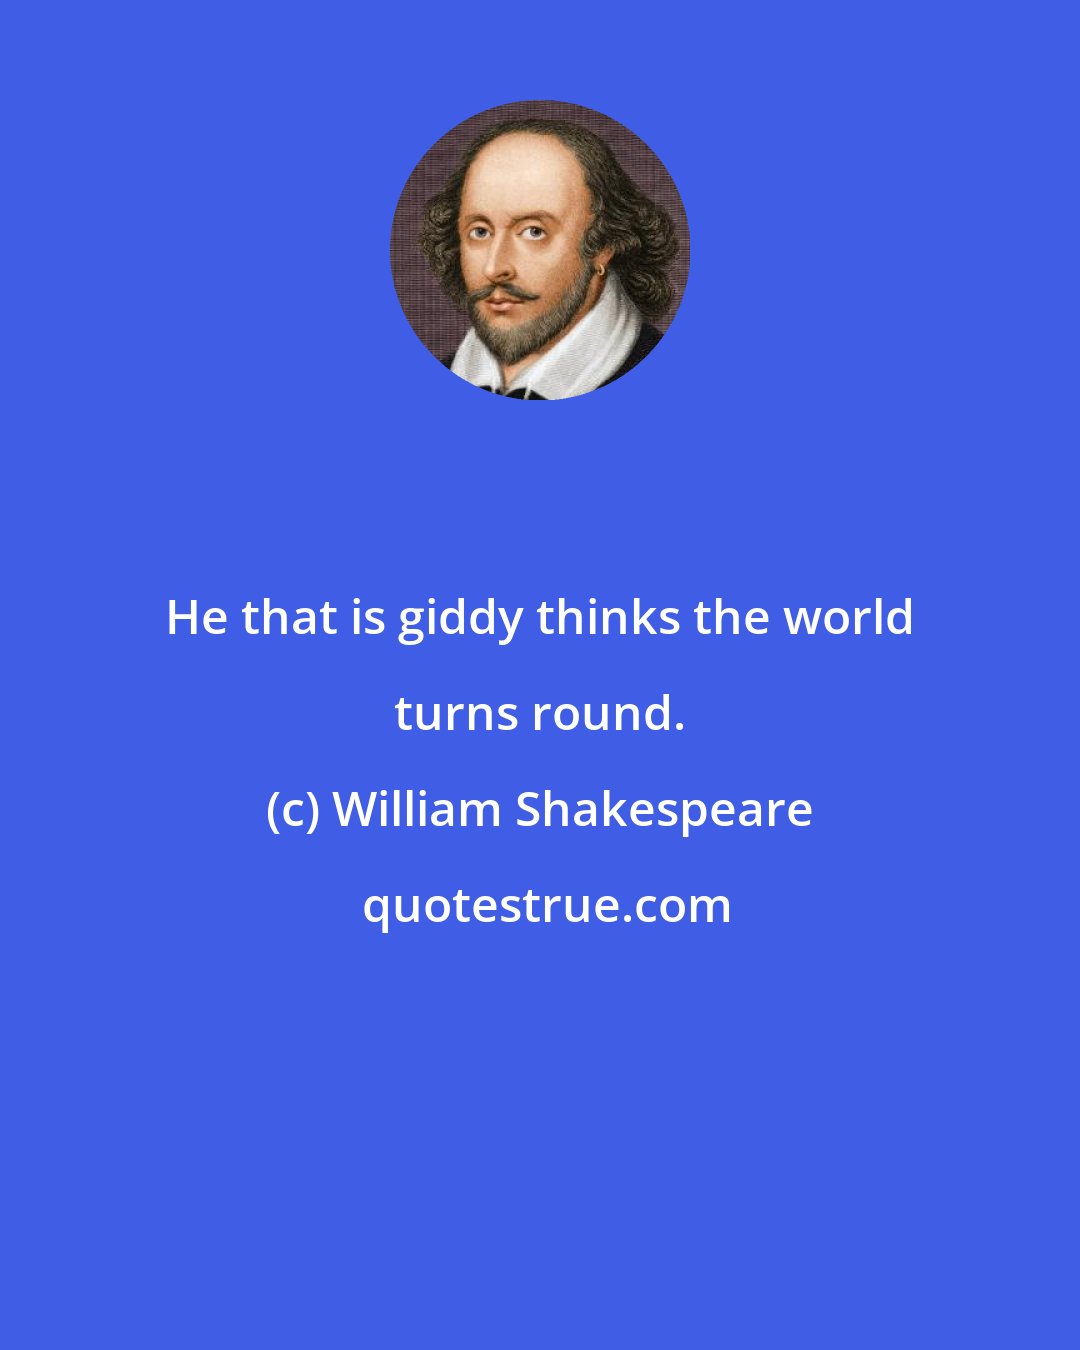 William Shakespeare: He that is giddy thinks the world turns round.